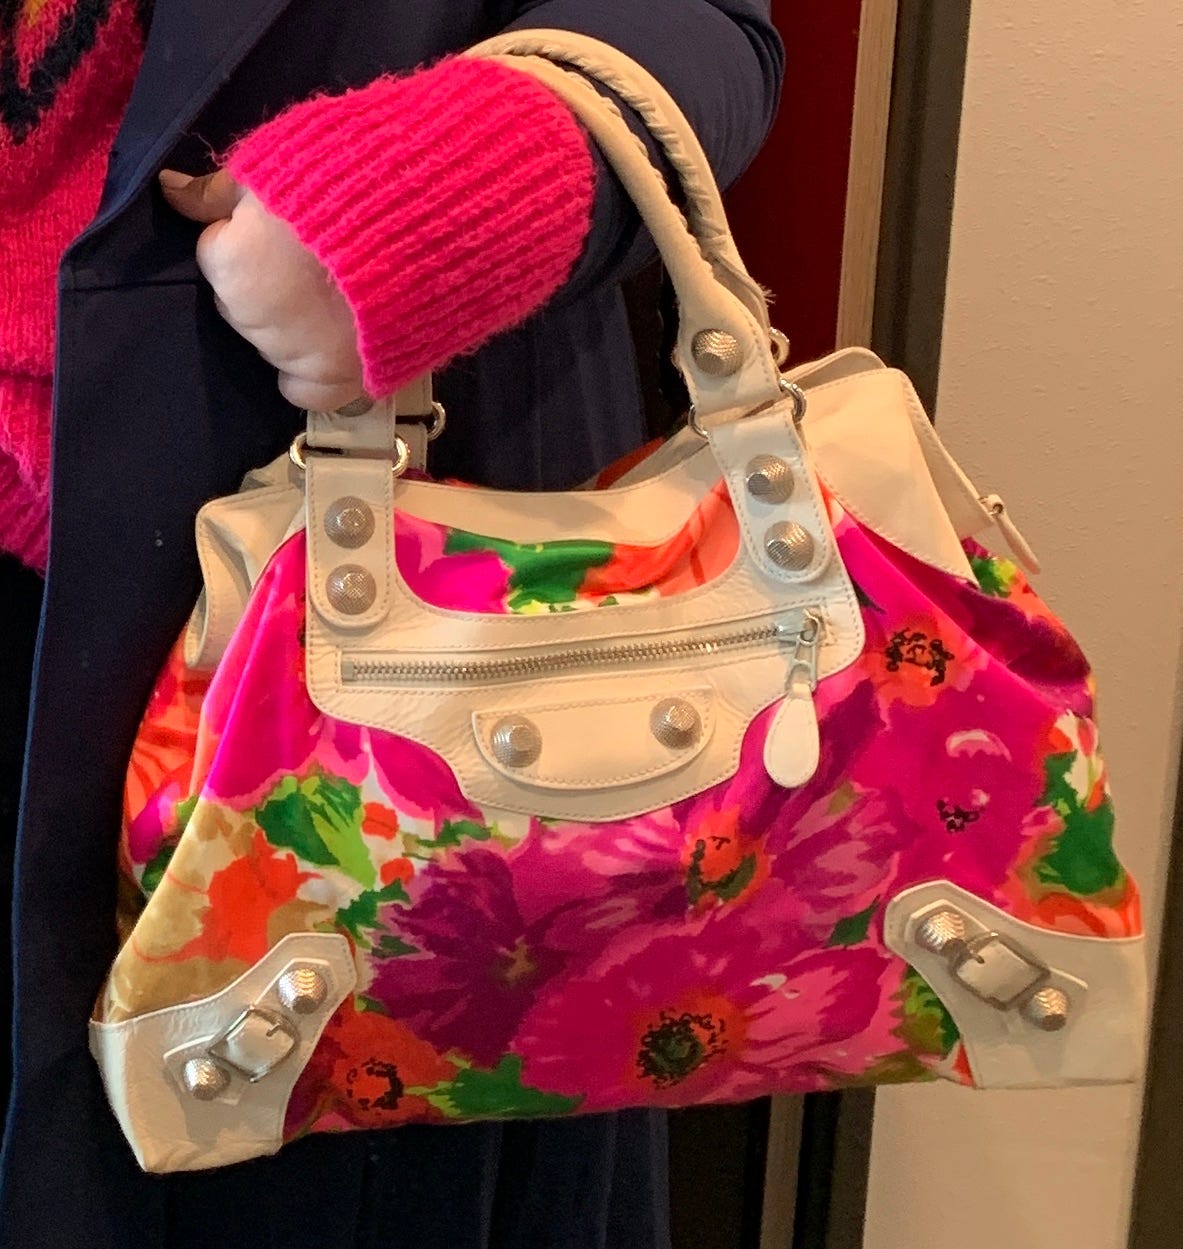 Balenciaga bag with hot pink, purple, orange and gold flowers on satin fabric with white leather trim.